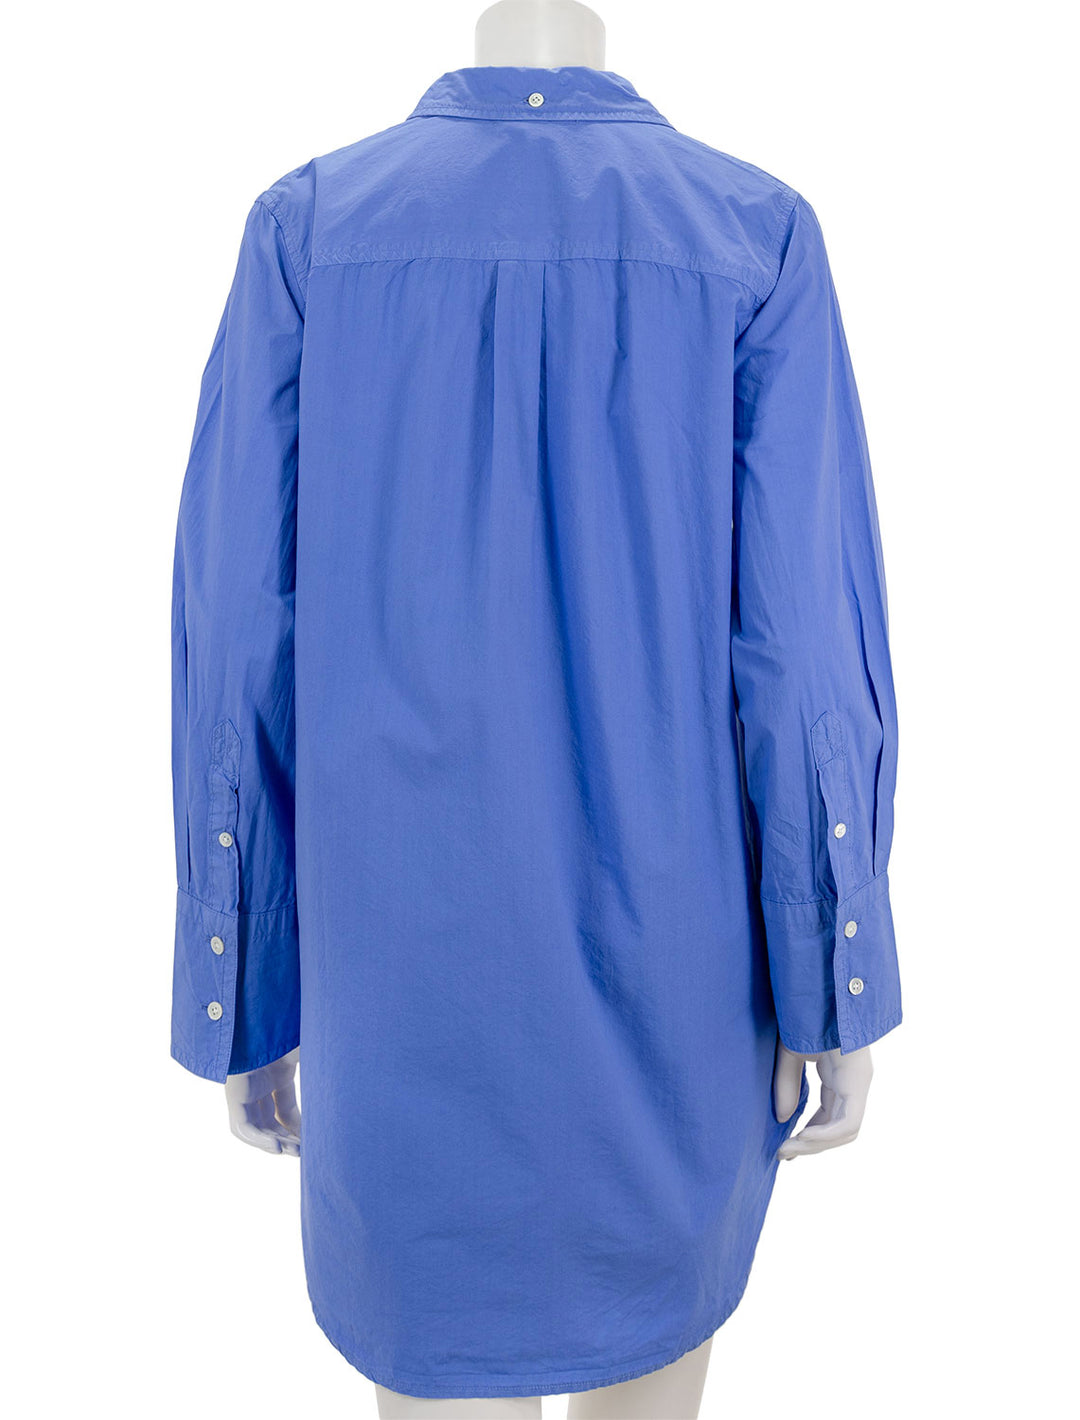 Back view of Alex Mill's belle shirt dress in french blue paper poplin.